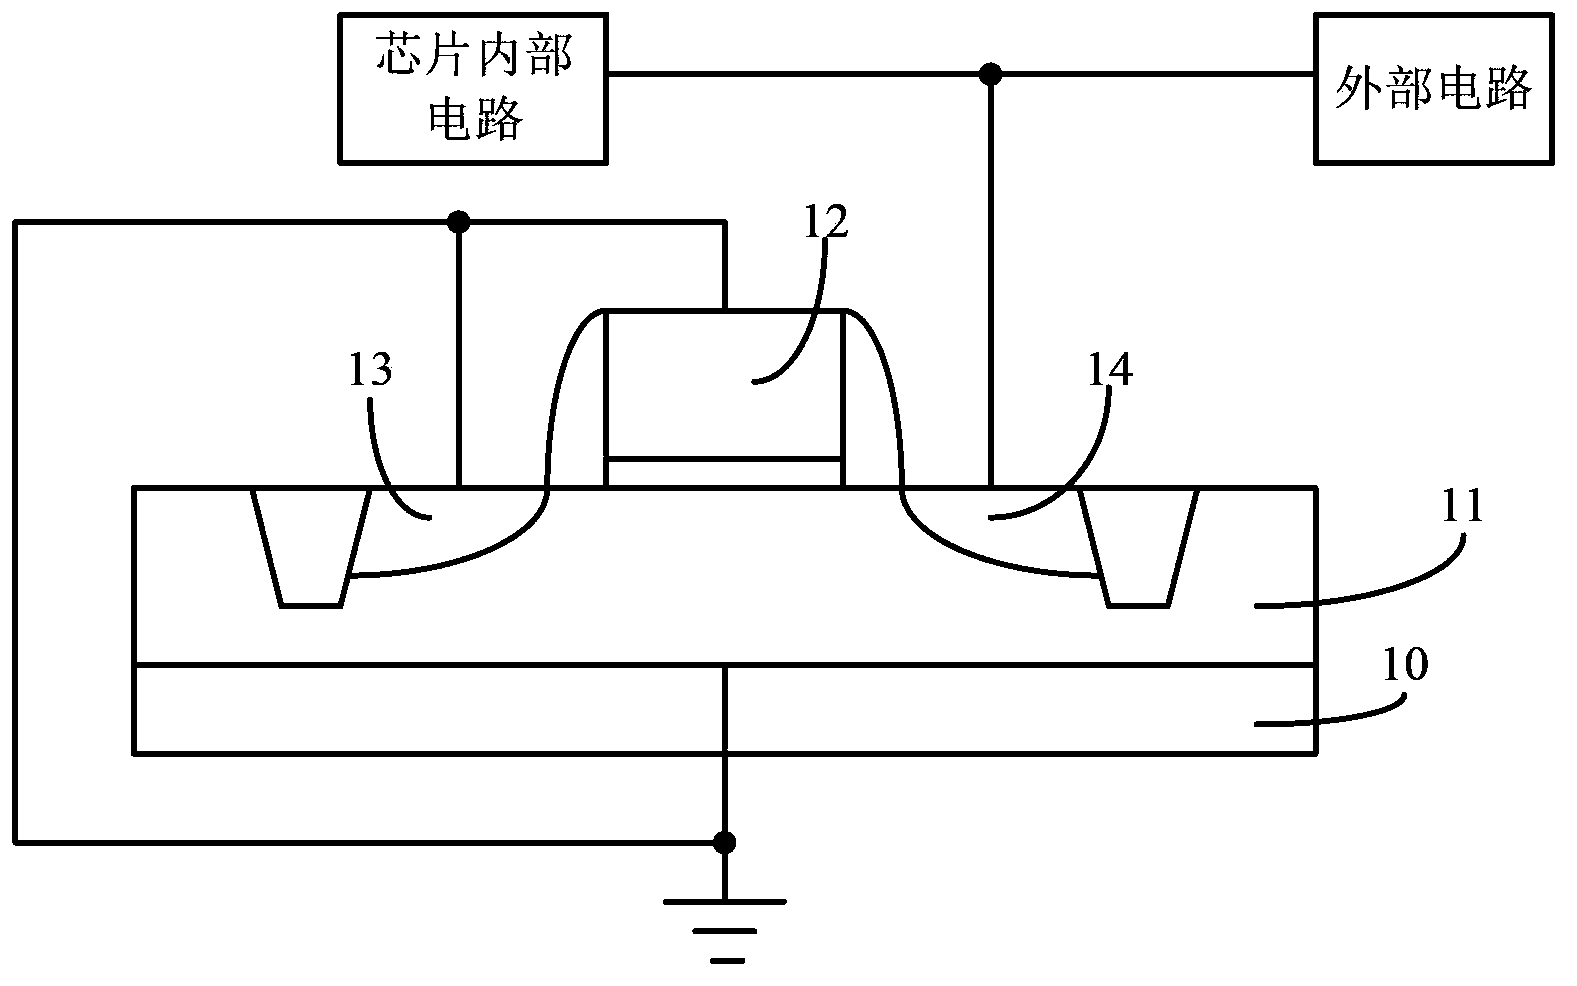 An electrostatic discharge protection structure